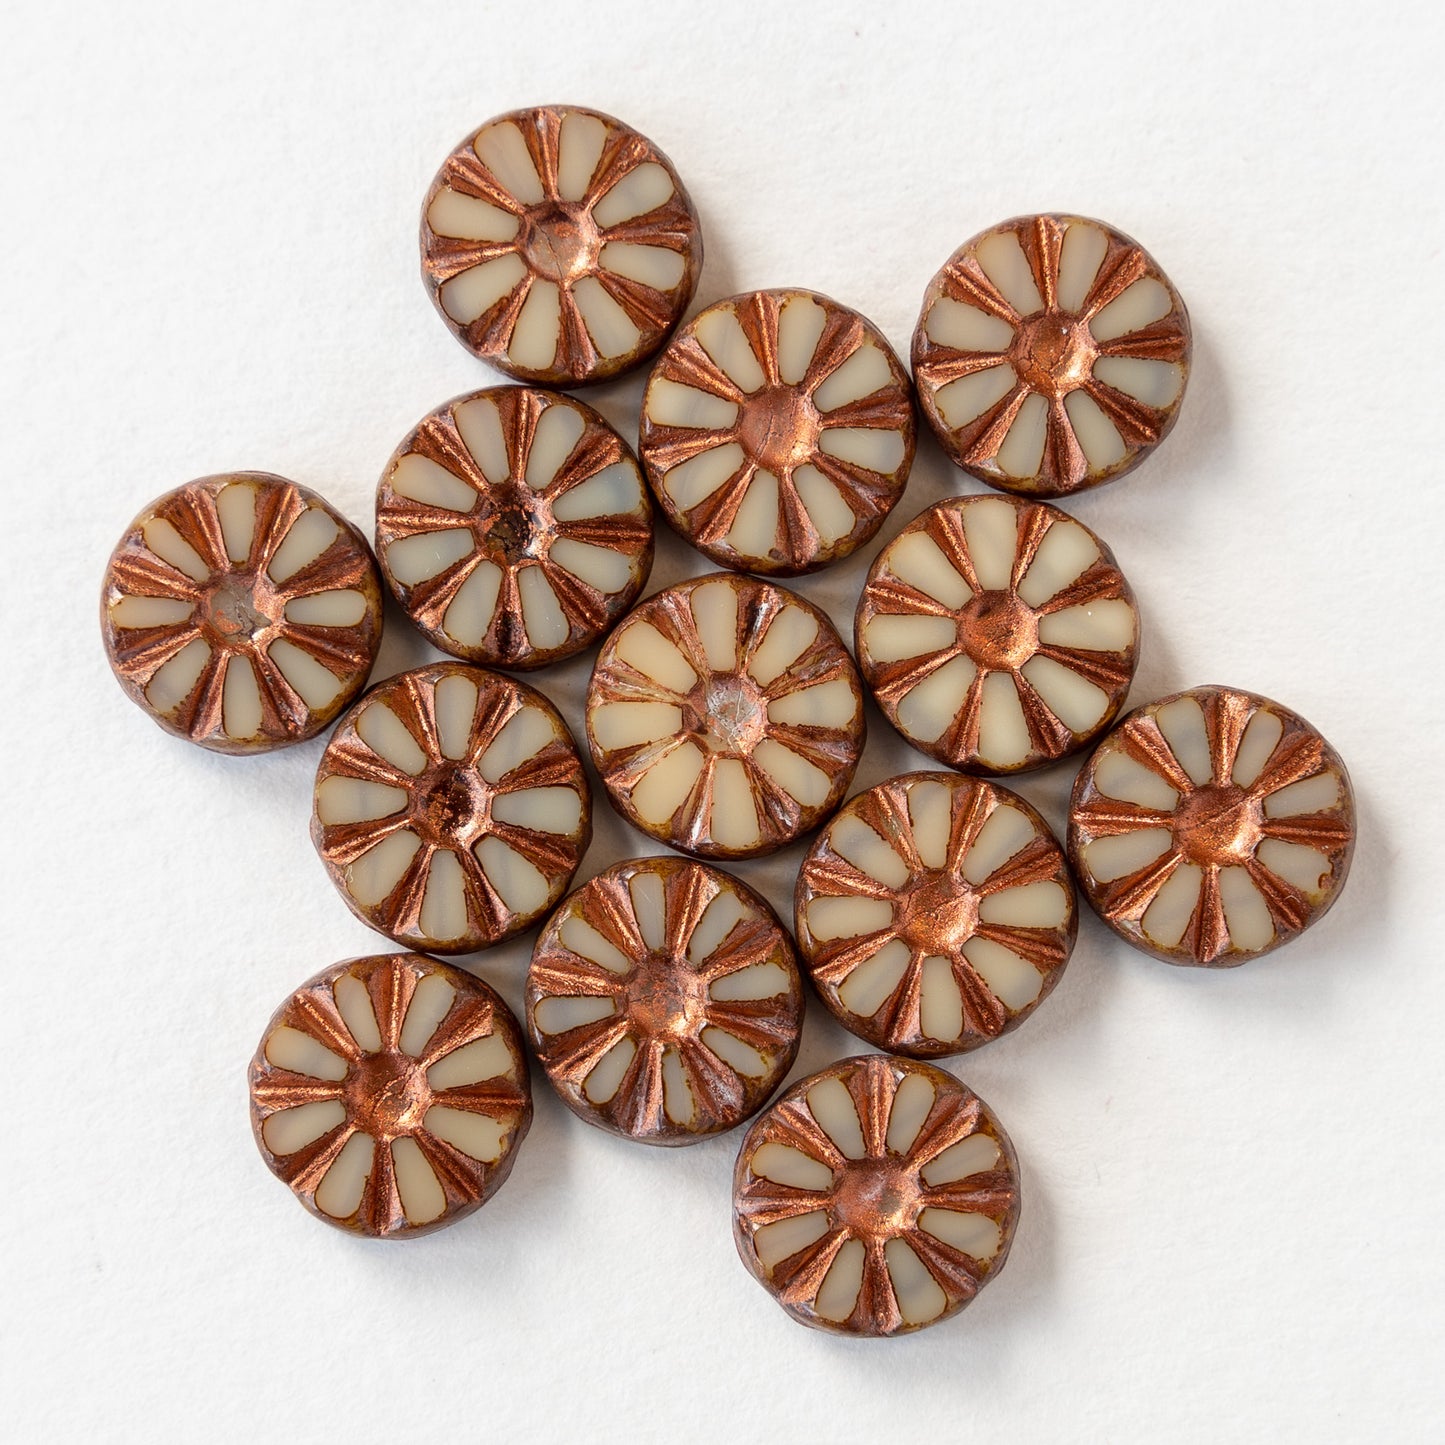 12mm sunflower Coin Beads - Ivory with Copper Wash - 10 or 30 Beads